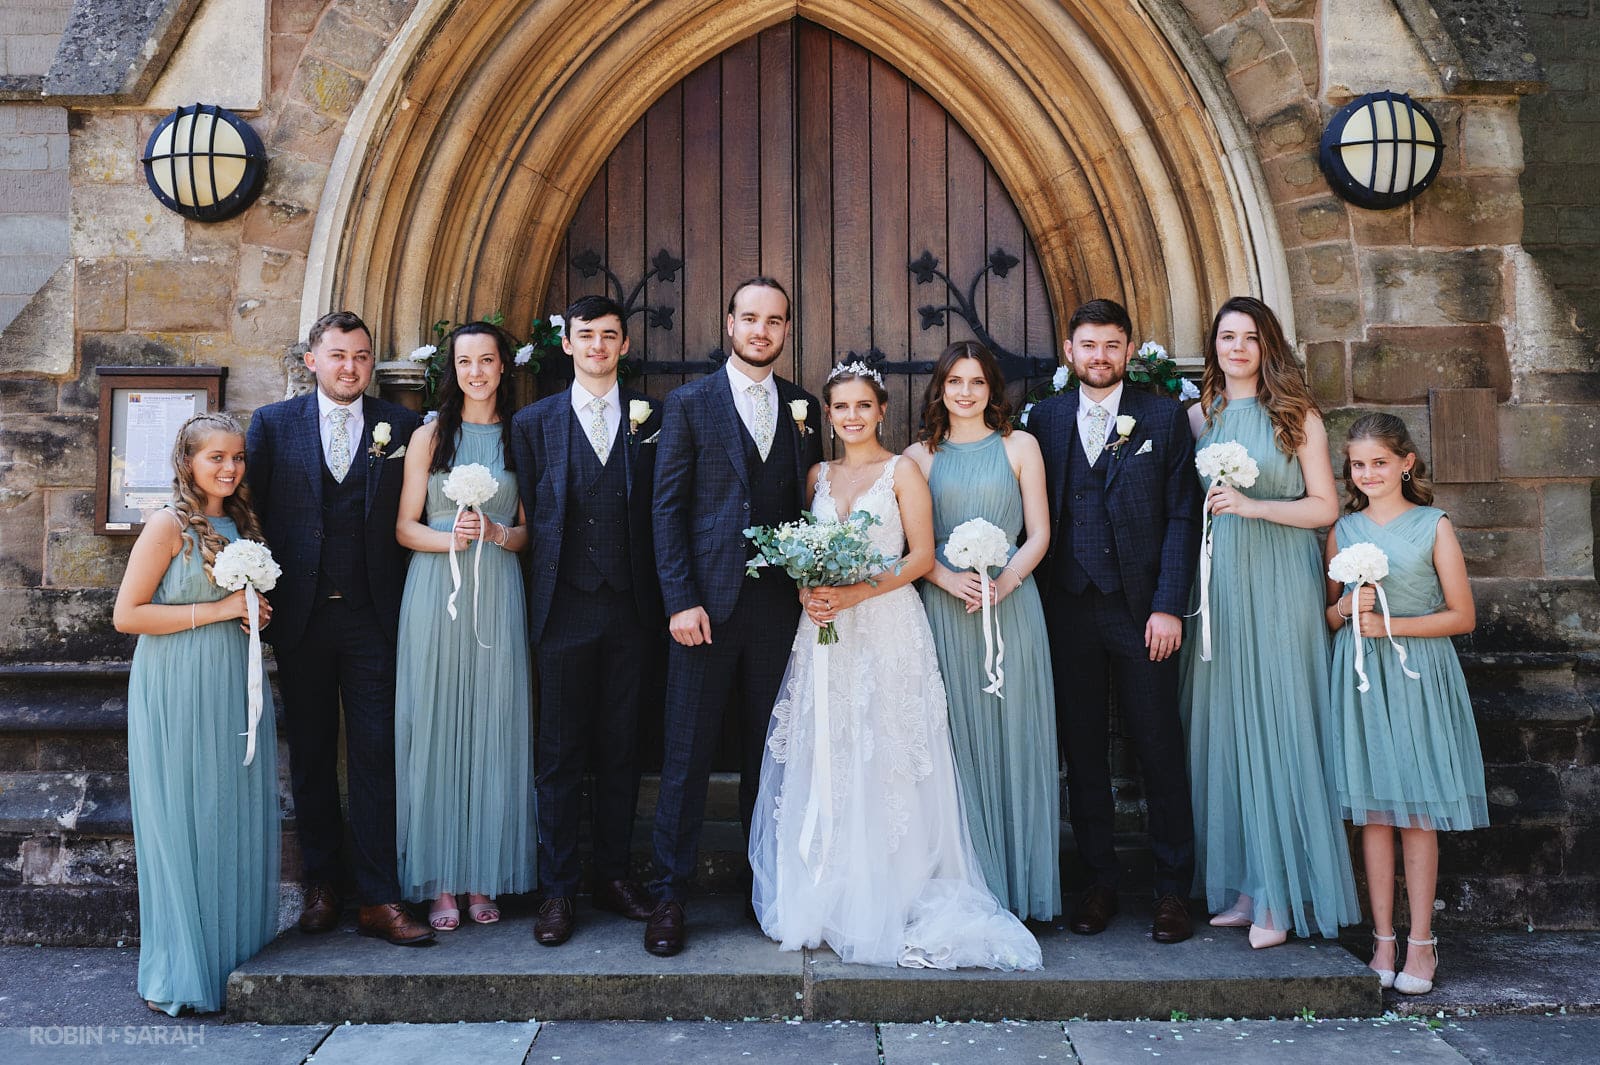 Group photo of Bride, Groom, bridesmaids and ushers at St Peter's church Bromsgrove